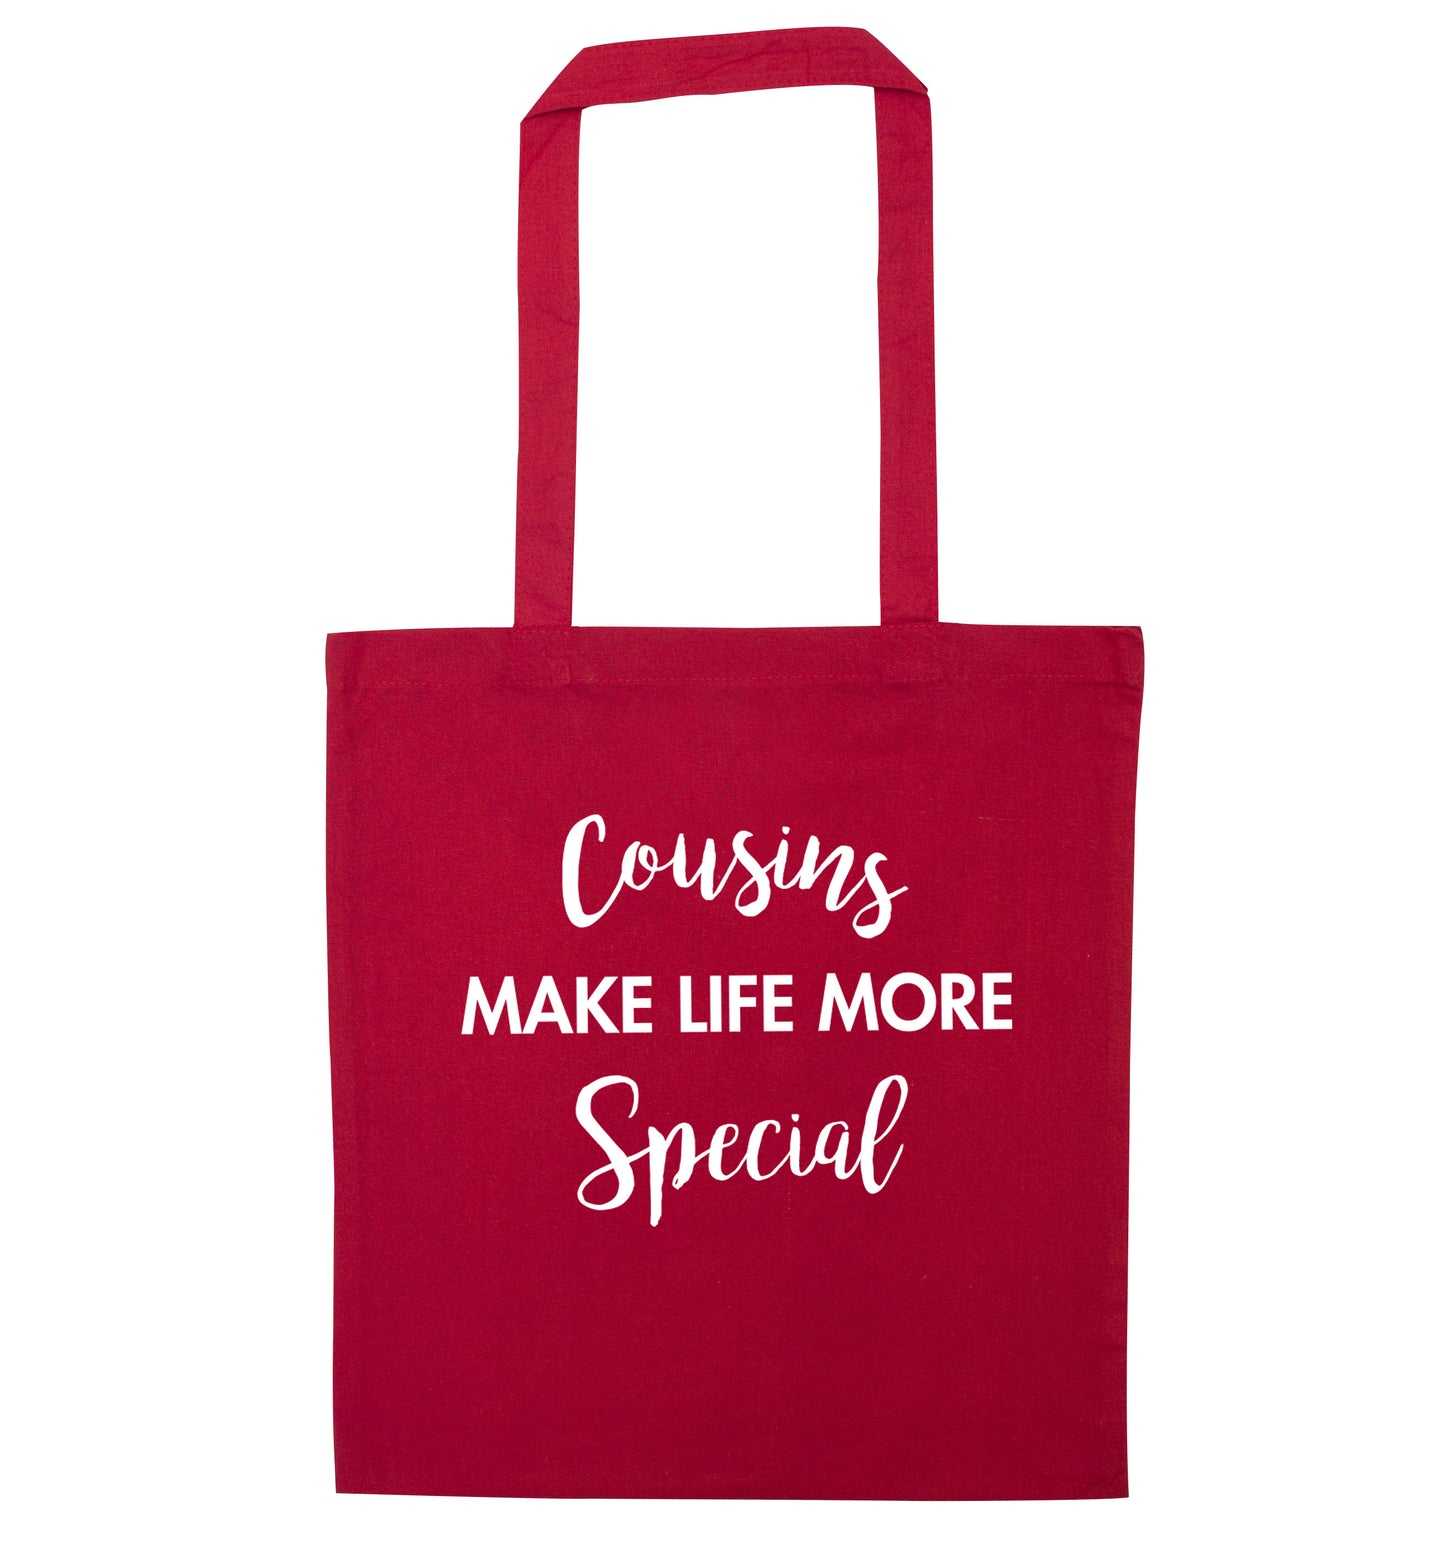 Cousins make life more special red tote bag